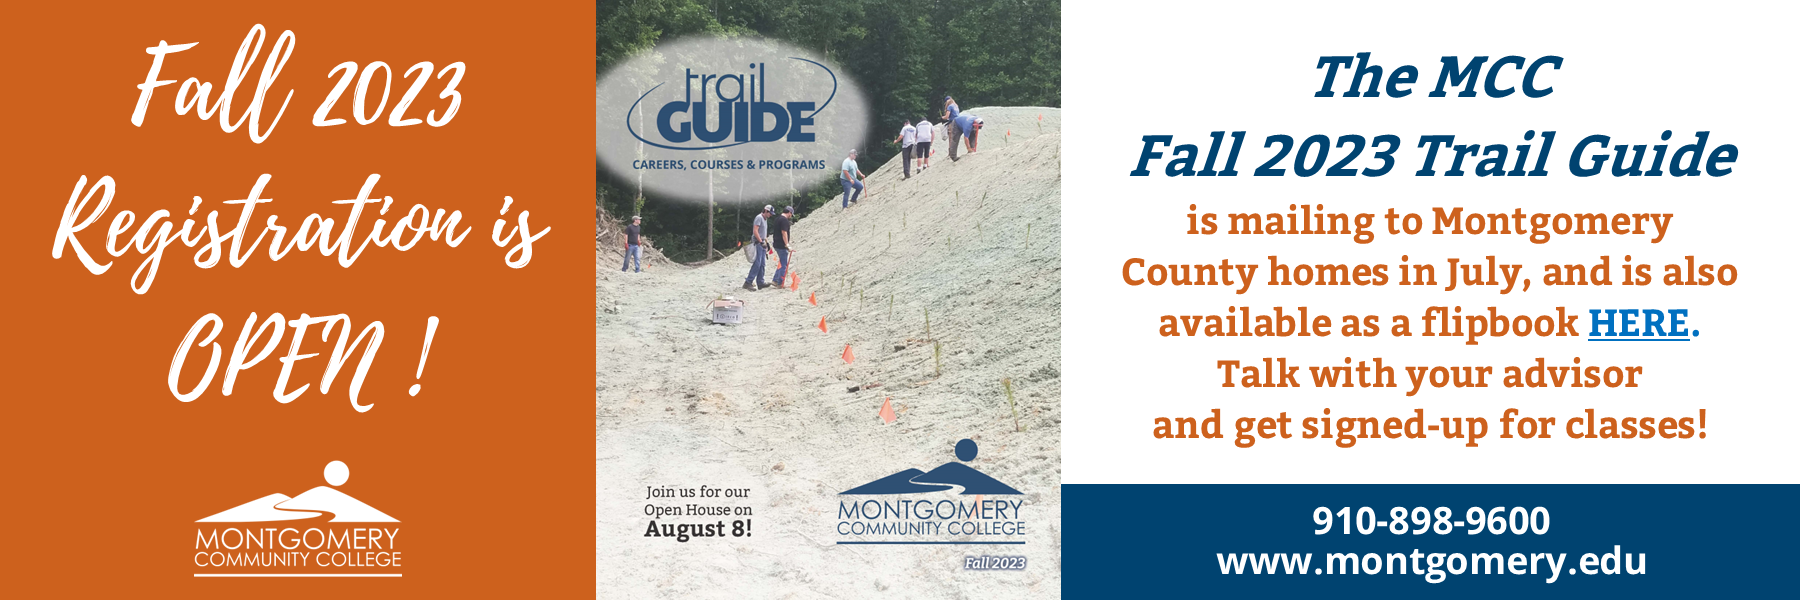 Fall 2023 registration is open! Join us for our open house on August 8! The MCC Fall 2023 Trail Guide is mailing to Montgomery County homes in July, and is also available as a flipbook here. Talki with your advisor and get signed-up for classes! 910-898-9600 www.montgomery.edu